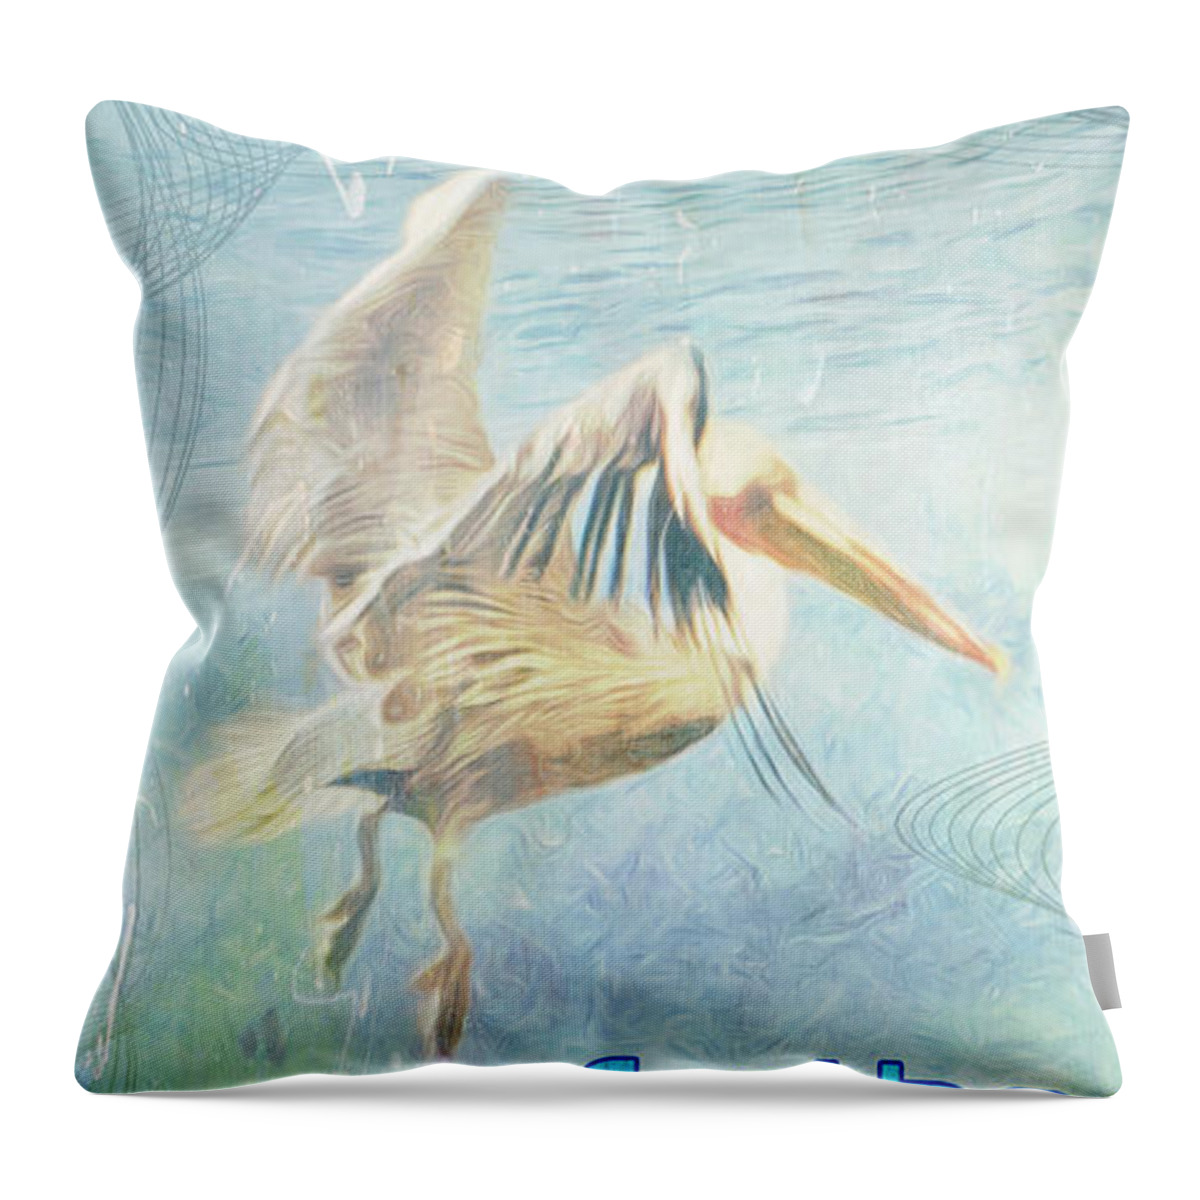 Pelican Throw Pillow featuring the digital art At the Shore by Moira Law